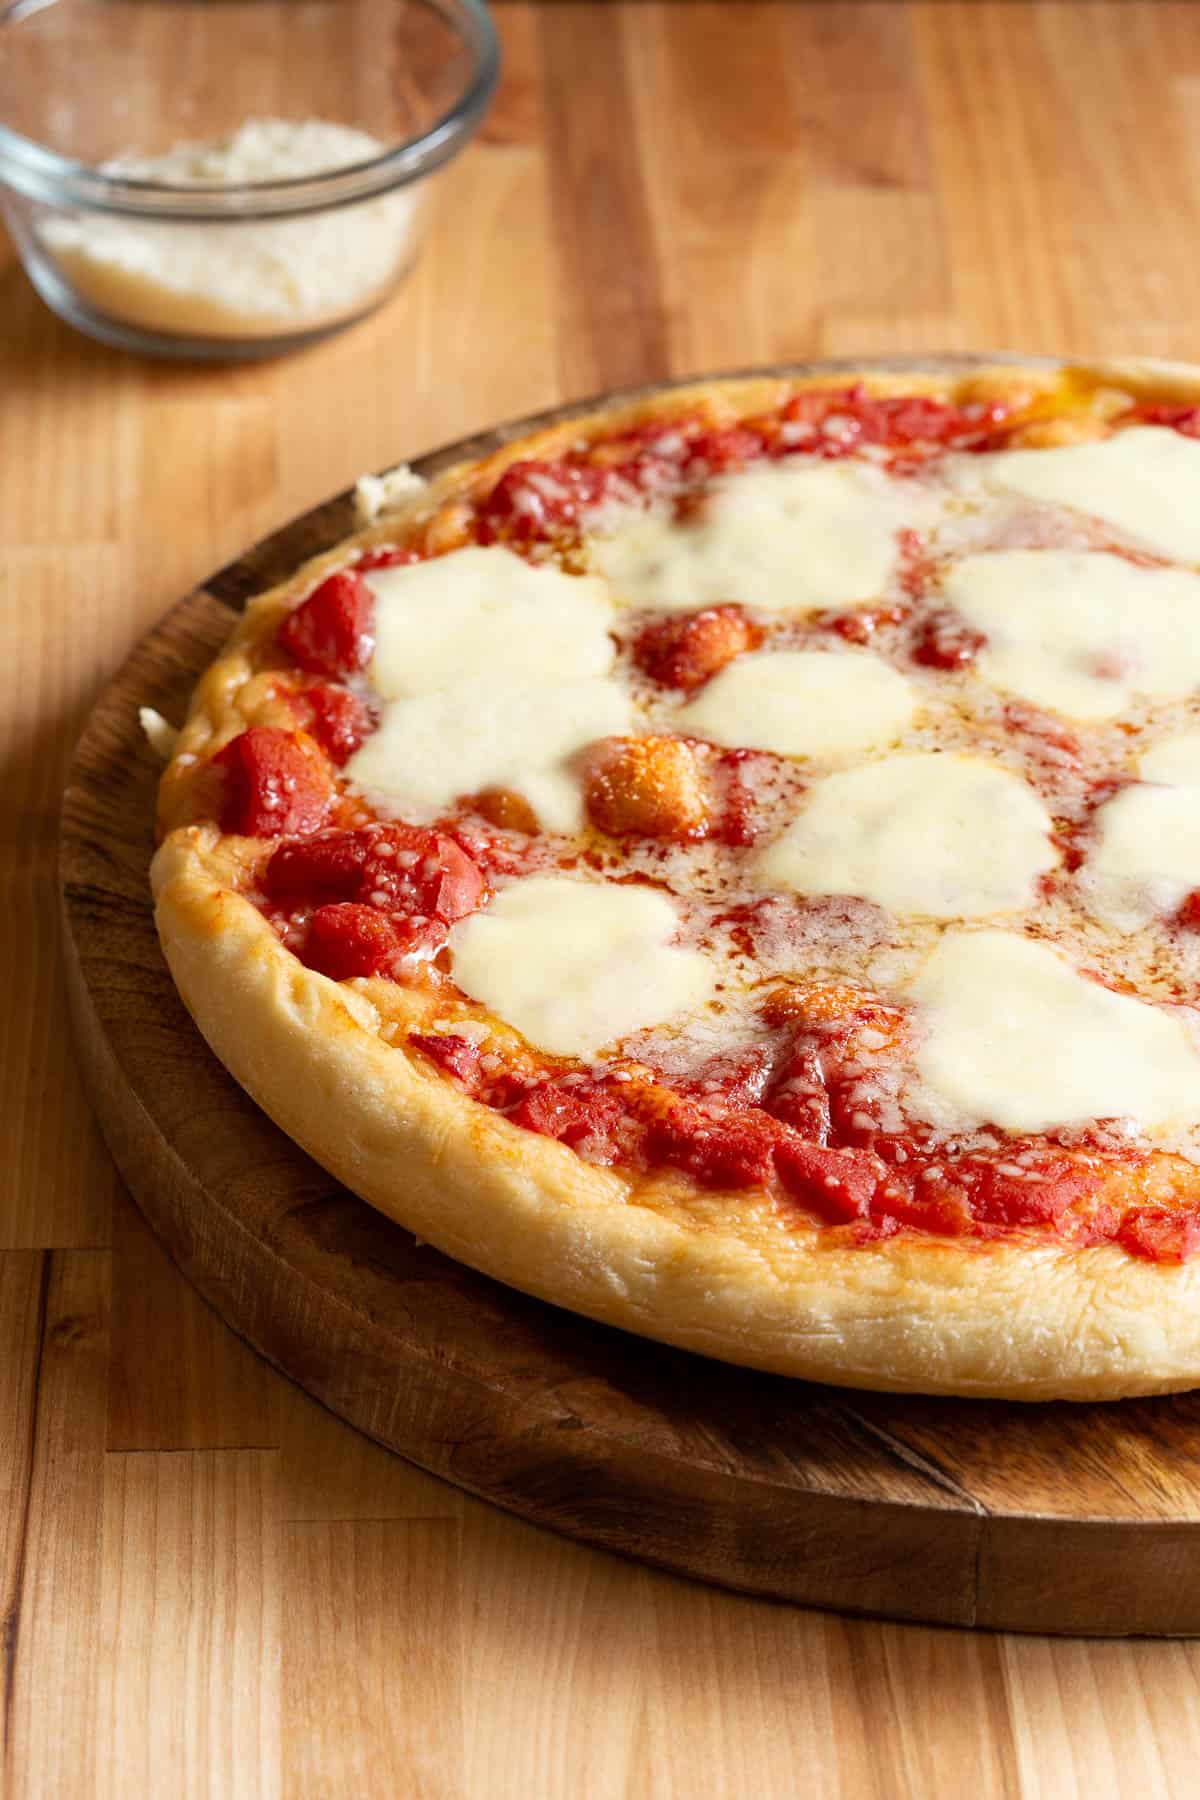 Large Naples style pizza topped with tomato and mozzarella.